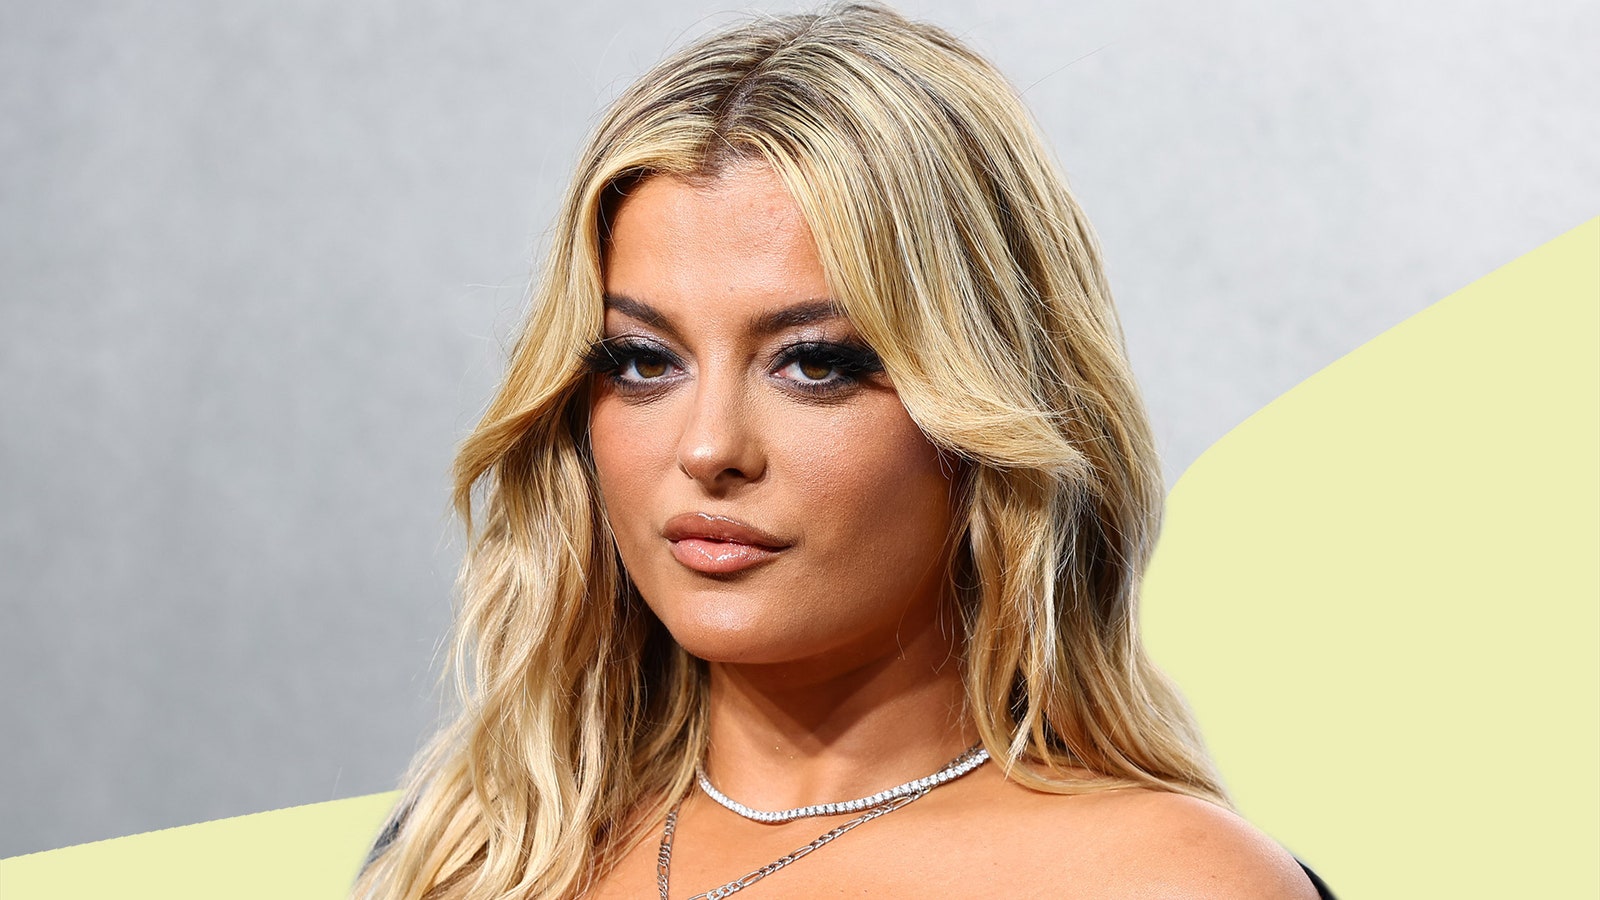 The man that gave Bebe Rexha a black eye by throwing a phone at her thought “it would be funny” &#8211; but violence towards women is not a joke